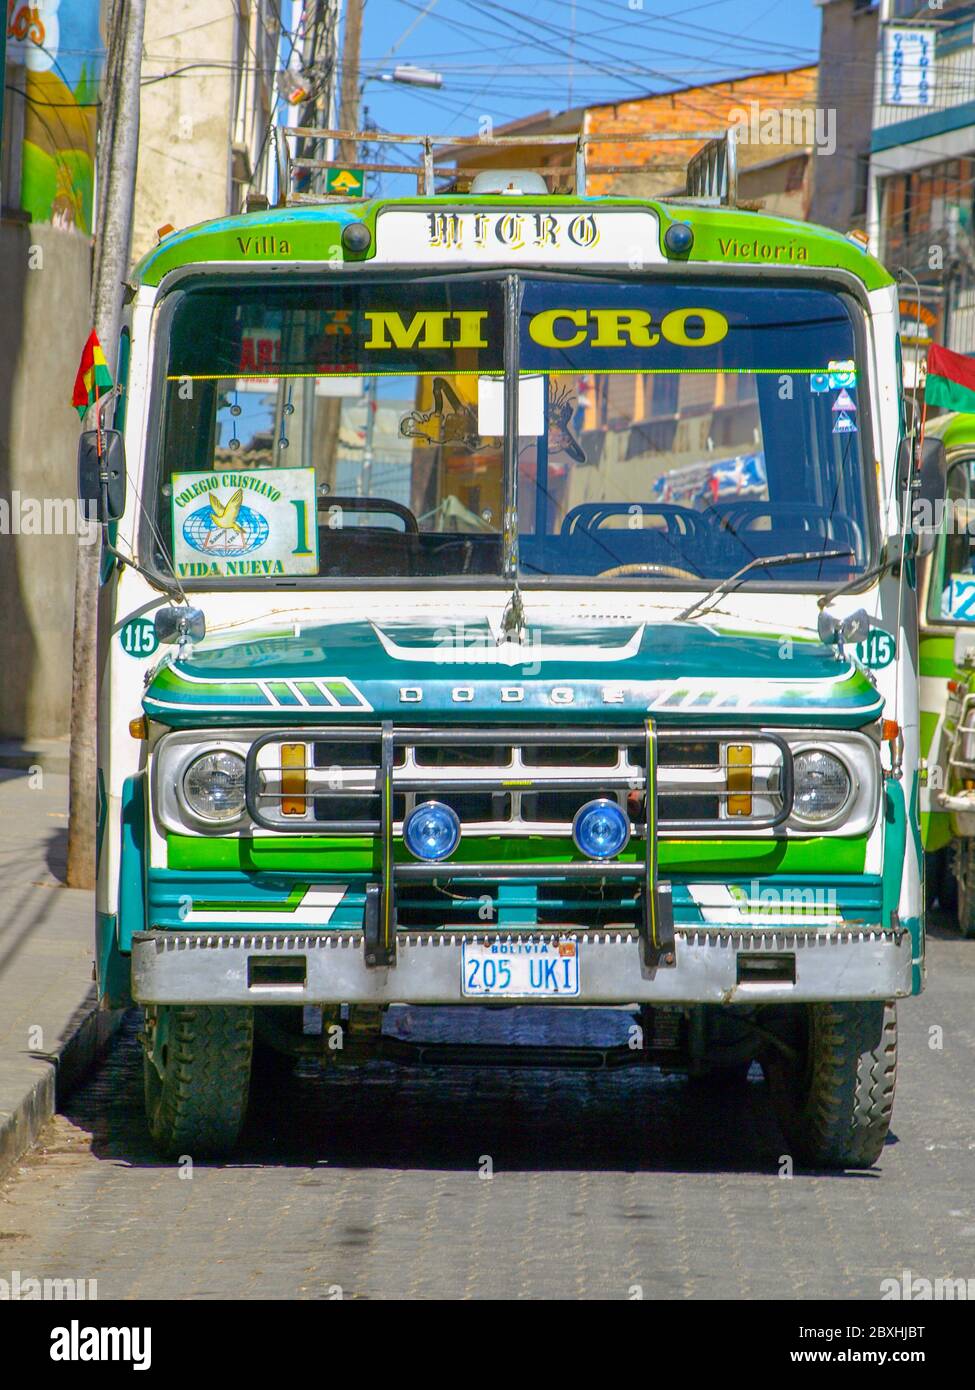 LA PAZ, BOLIVIA - JULY 21, 2008: Front view of old green Dodge micro bus in streets of La Paz, Bolivia. Stock Photo